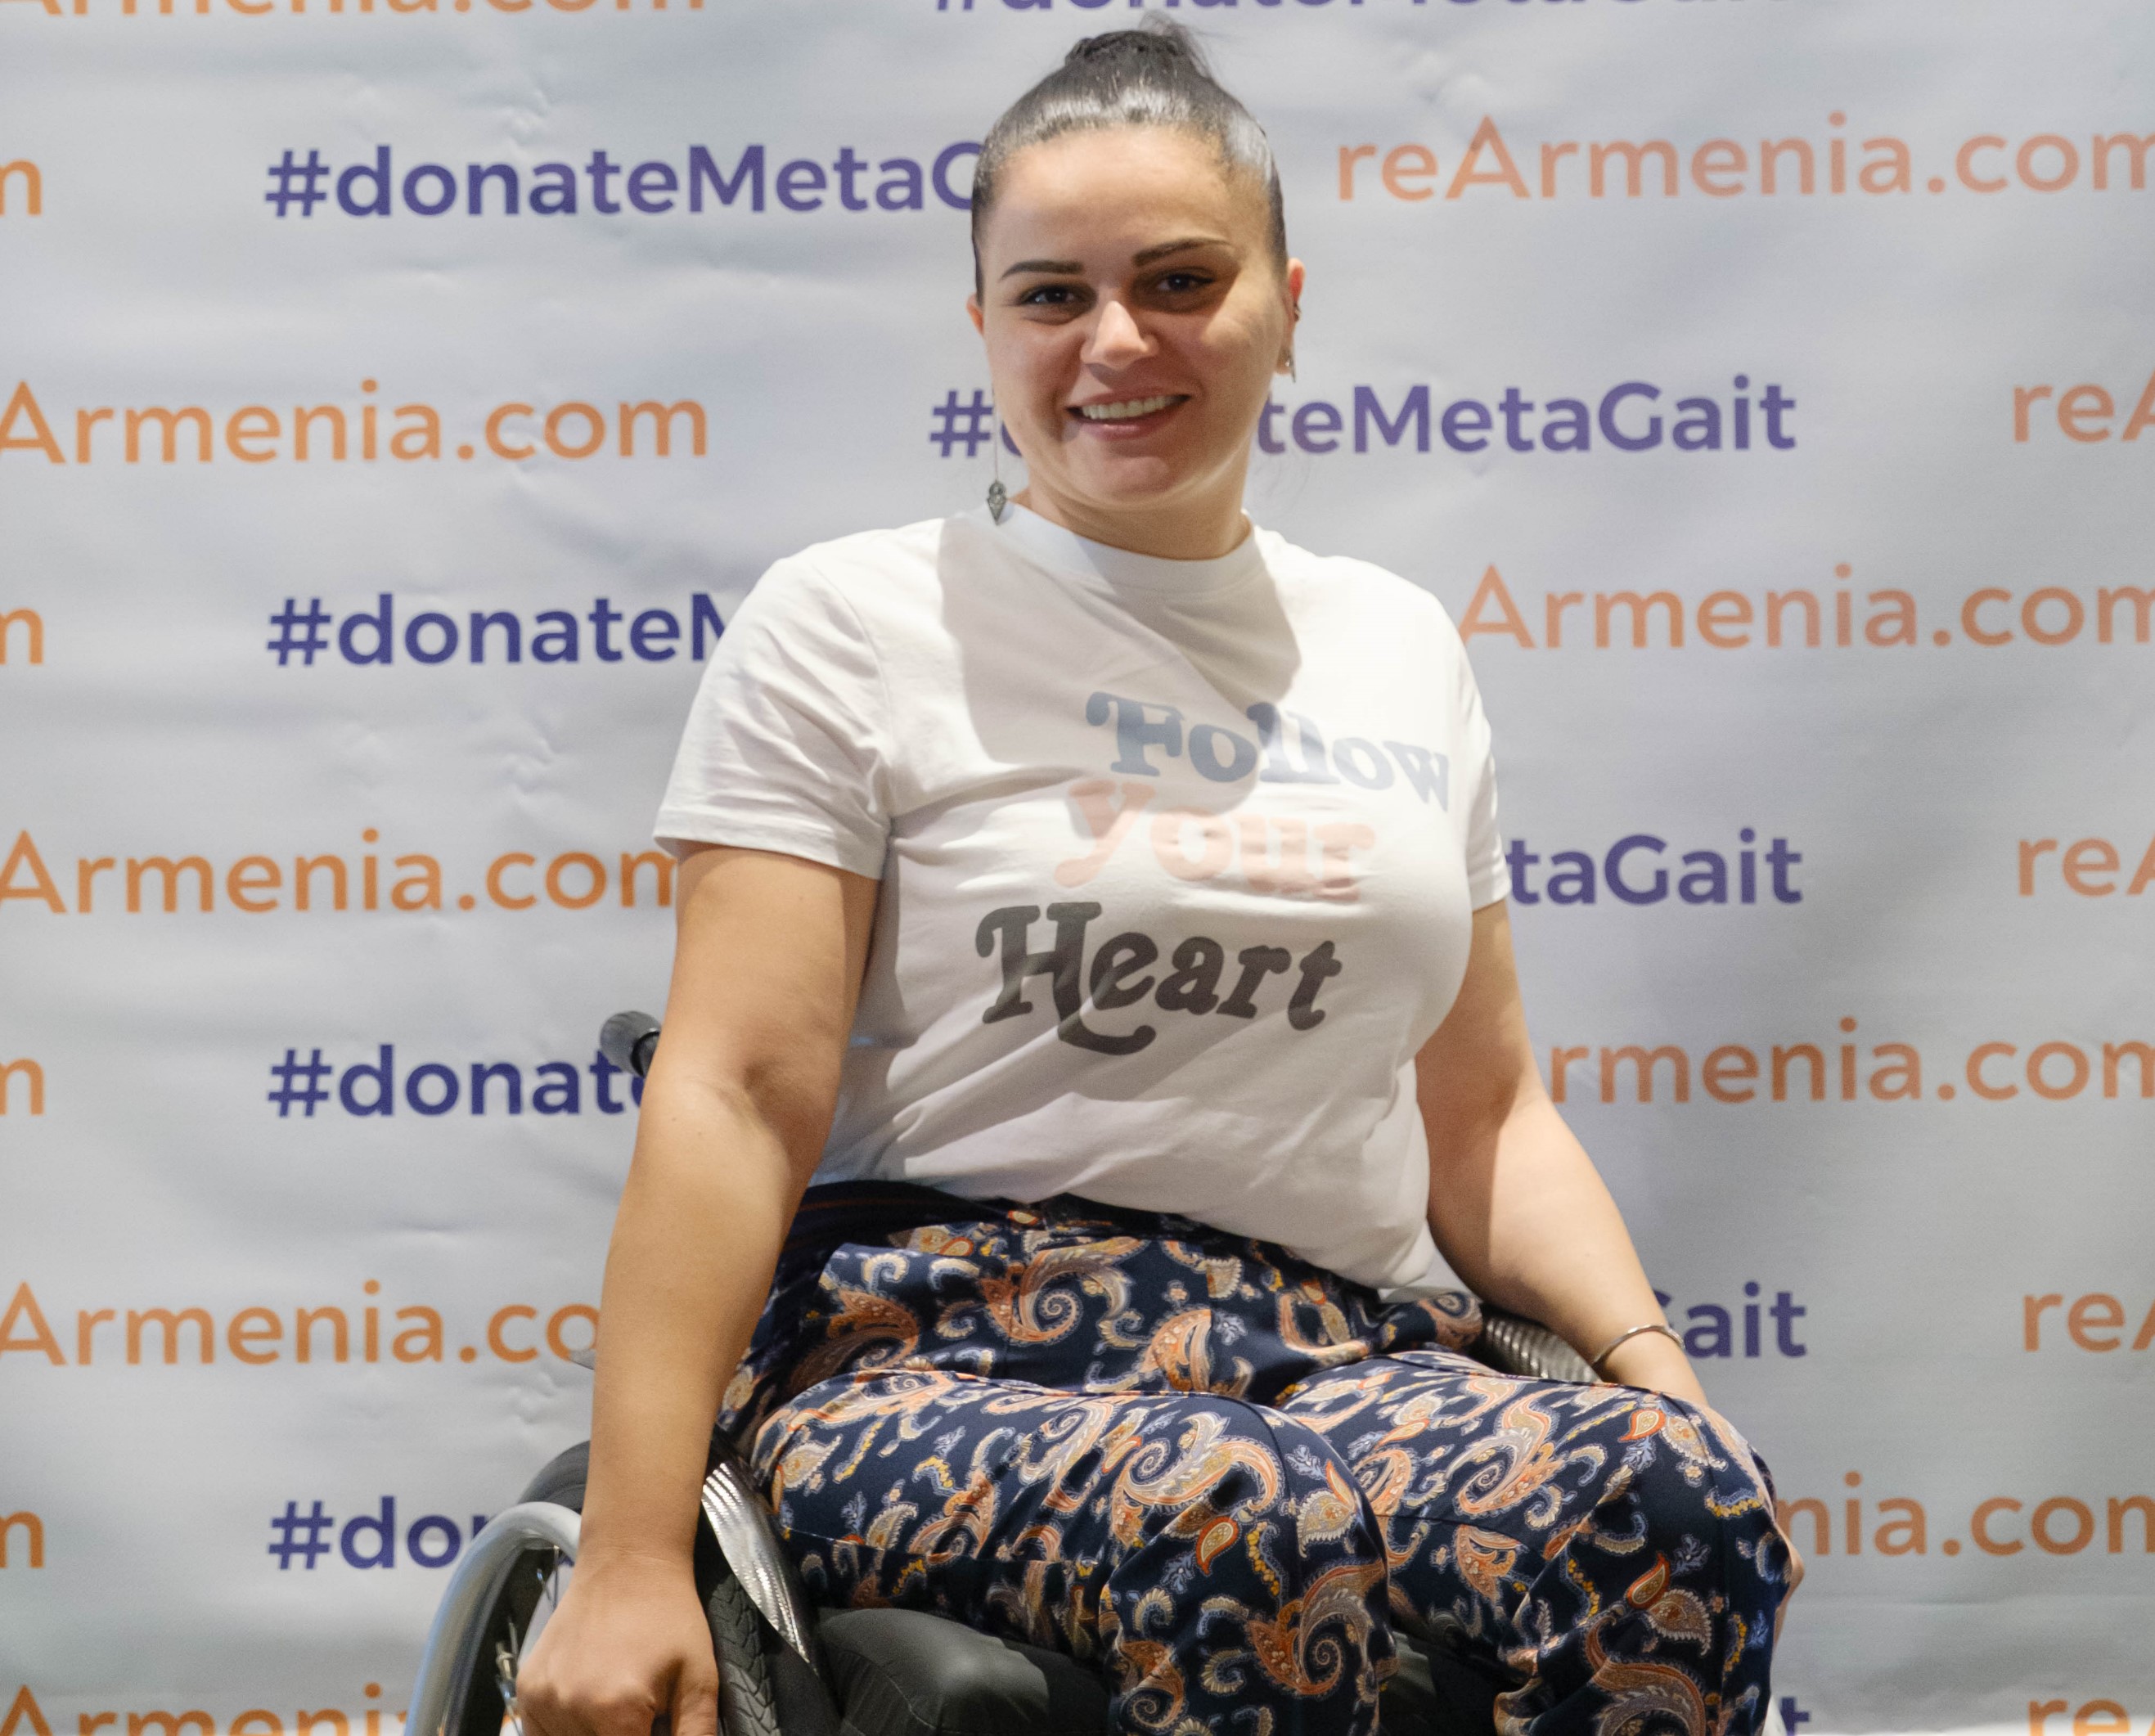 20 years later, Gohar can still feel parts of her legs thanks to MetaGait